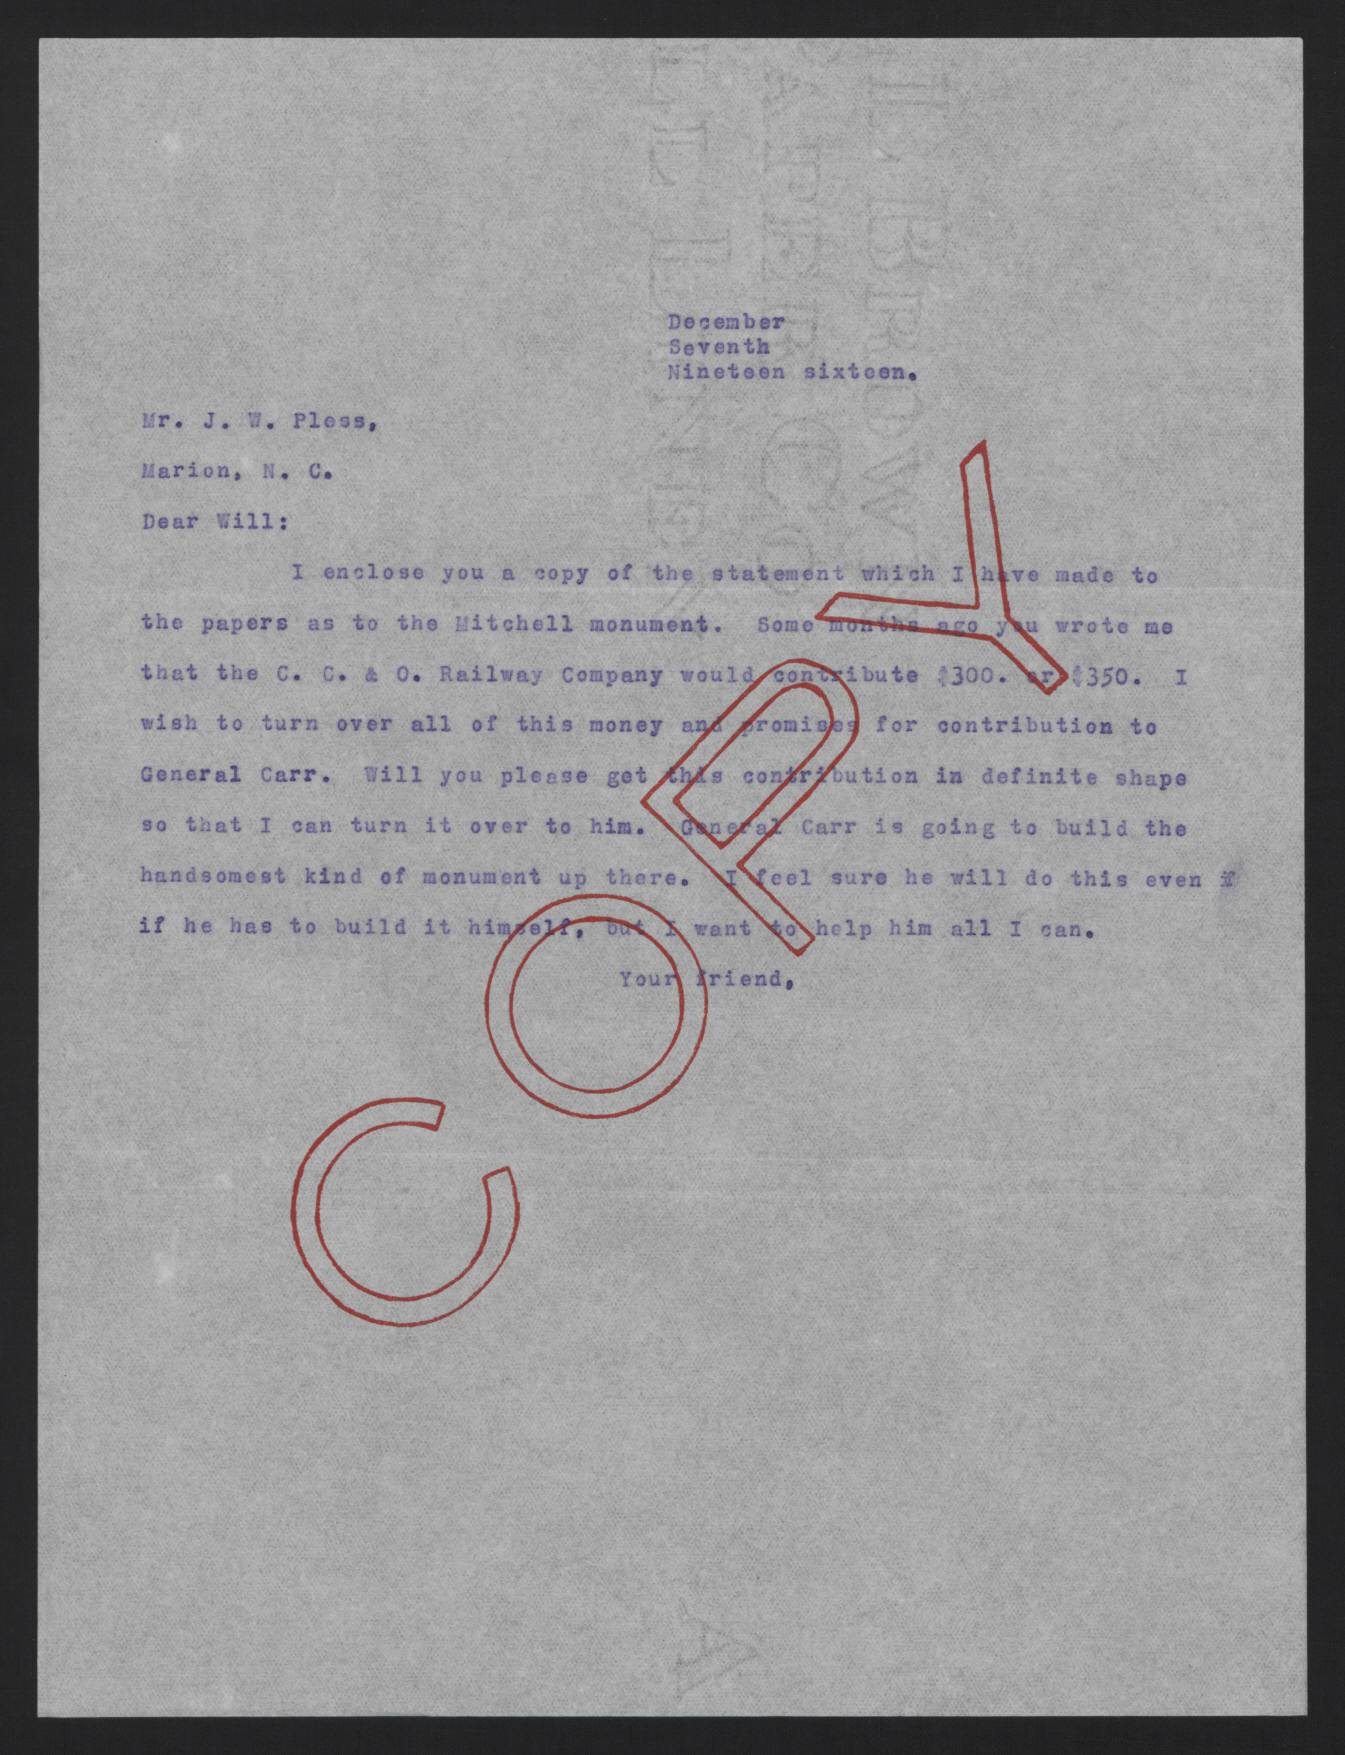 Letter from Craig to Pless, December 7, 1916